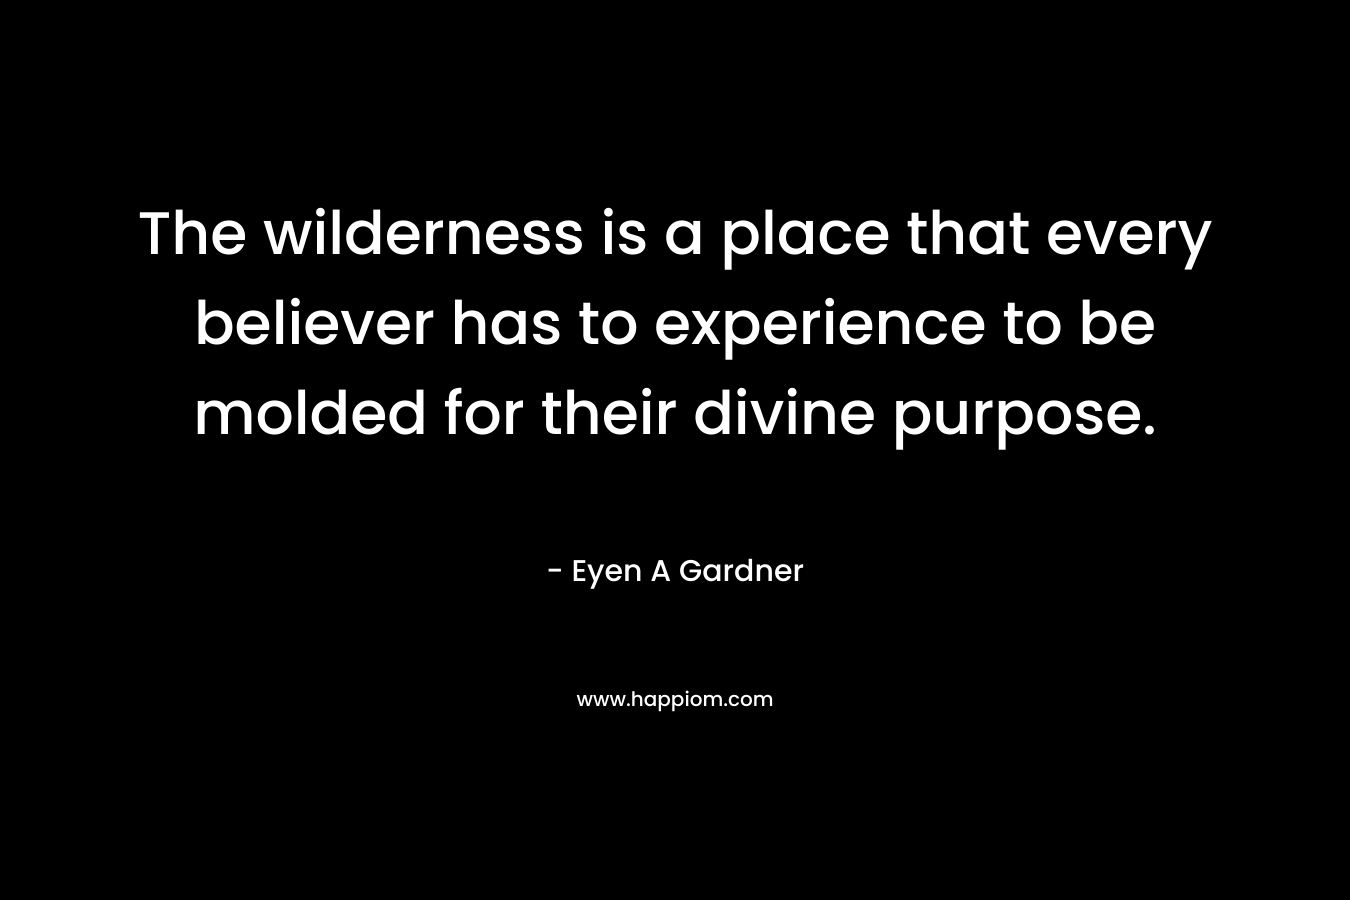 The wilderness is a place that every believer has to experience to be molded for their divine purpose.